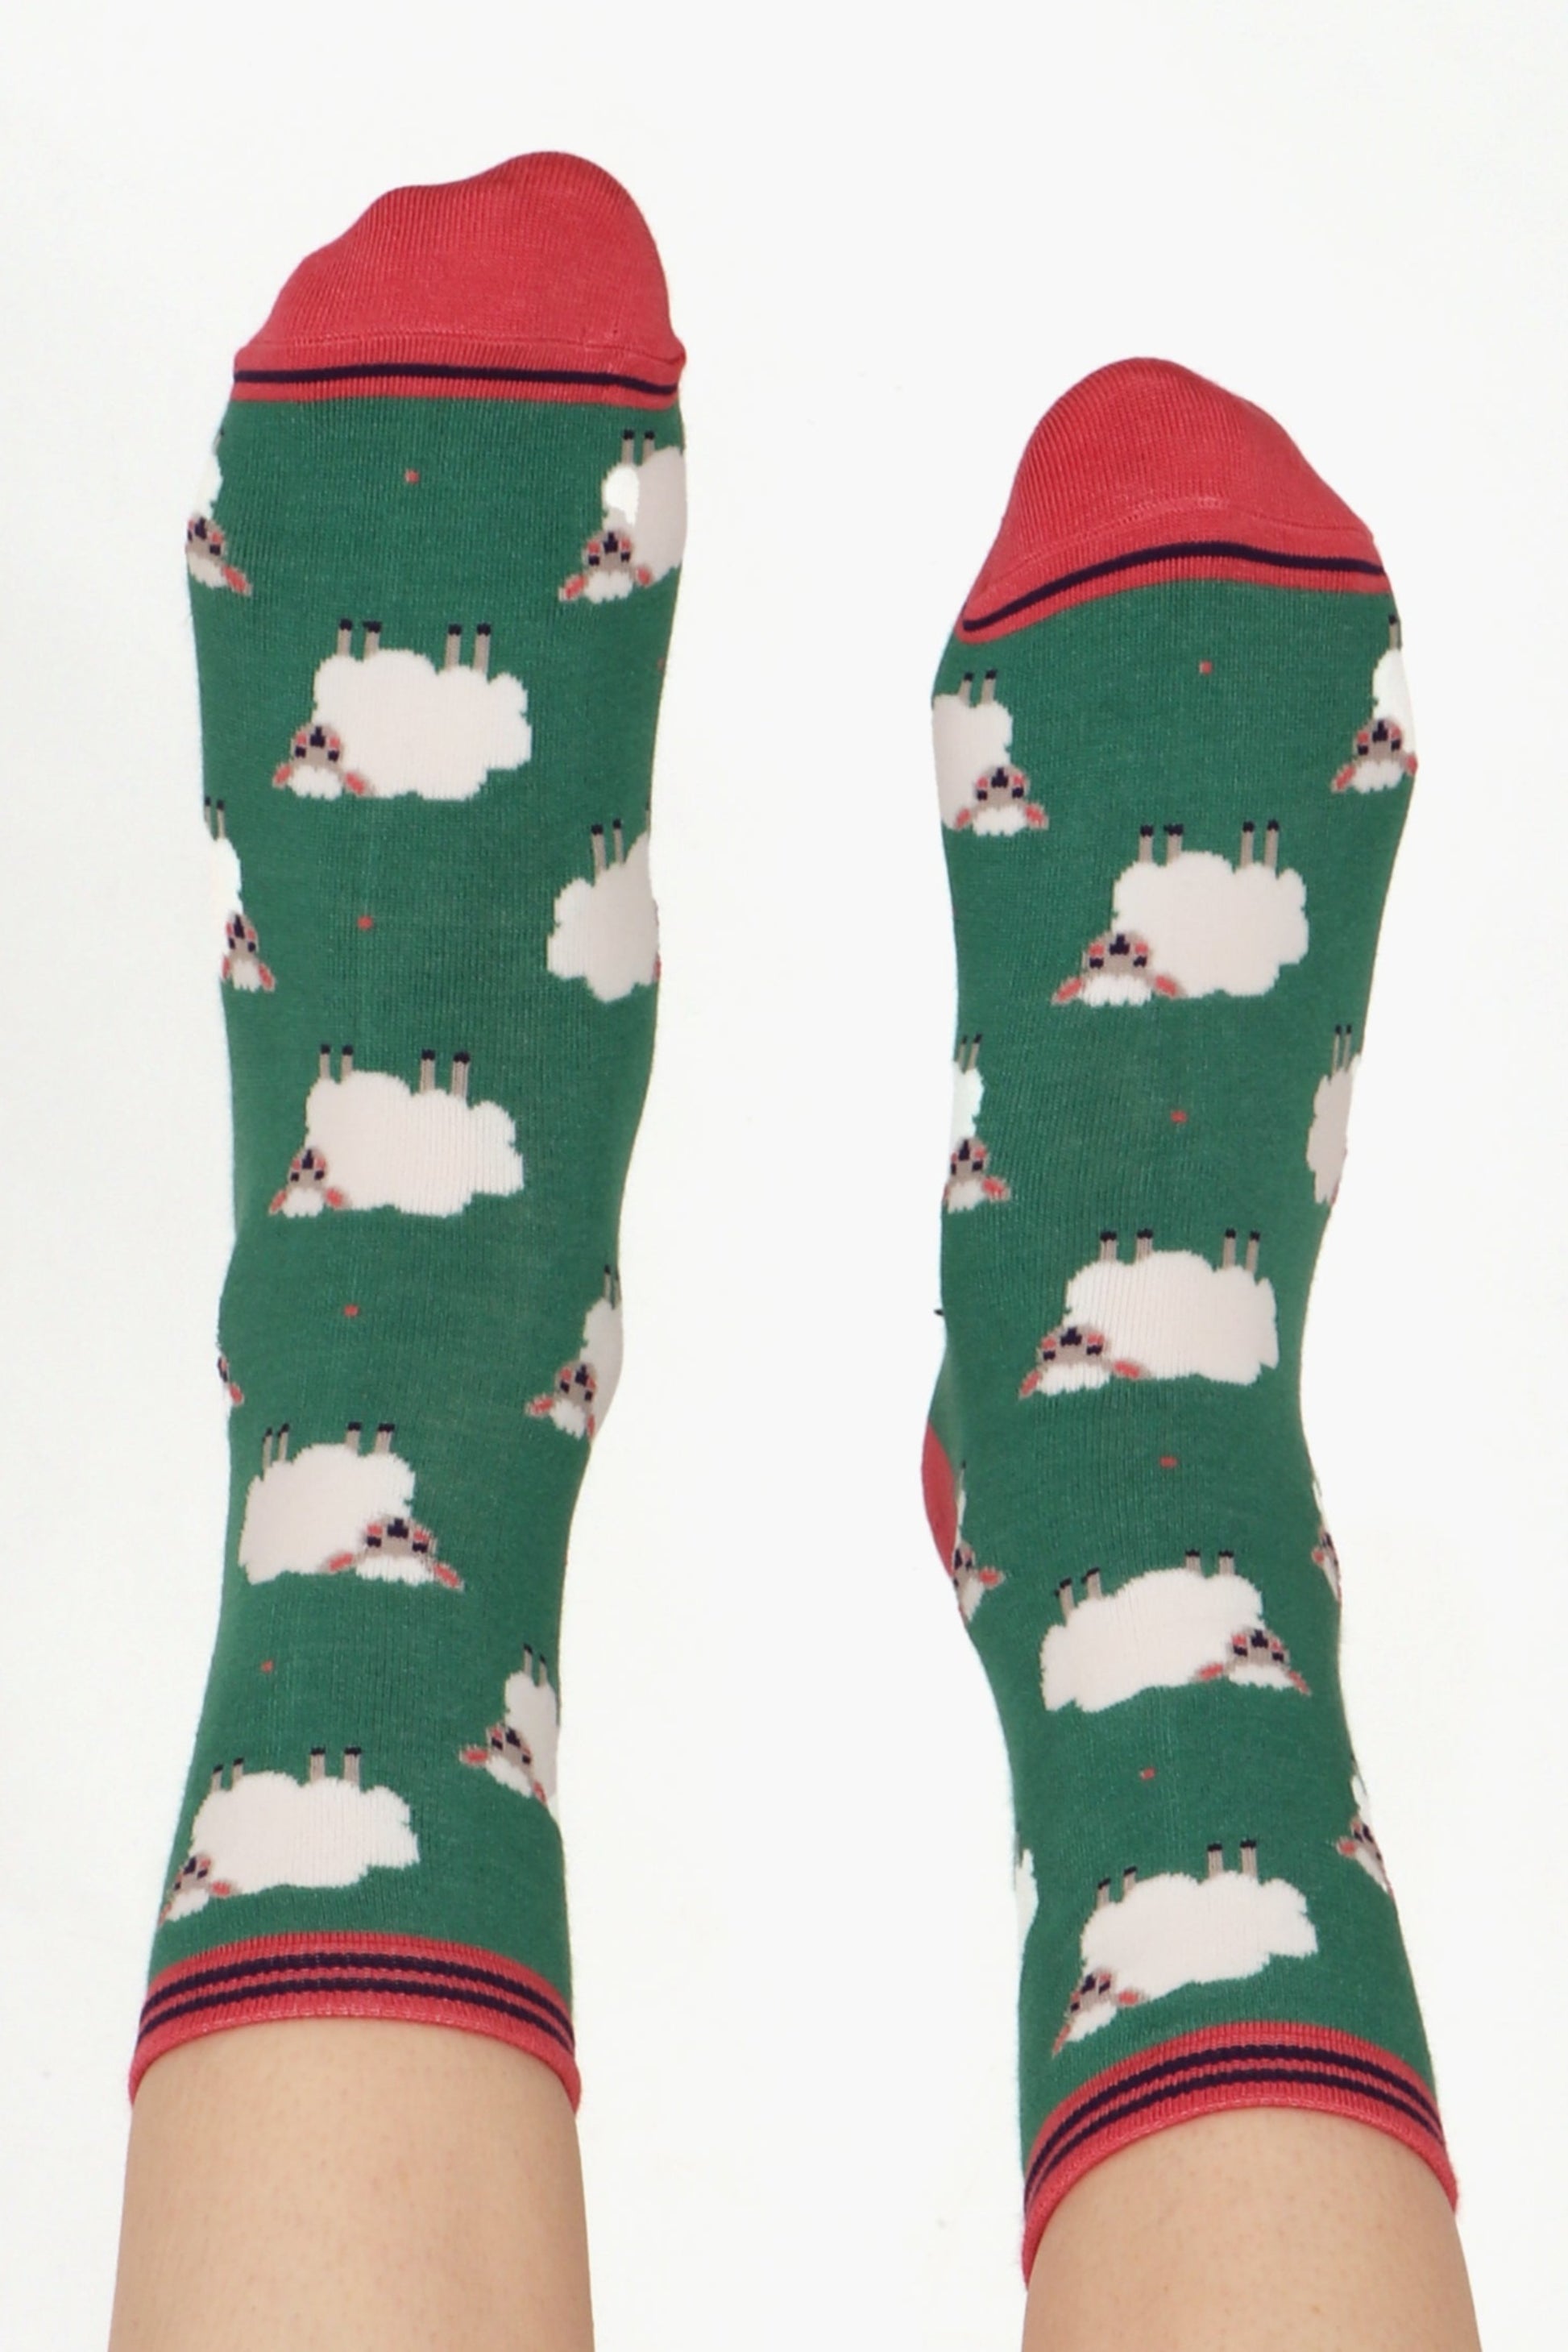 Ladies feet straight in the air wearing sheep lamb print bamboo socks. Contrasting pink toe and cuff can be seen